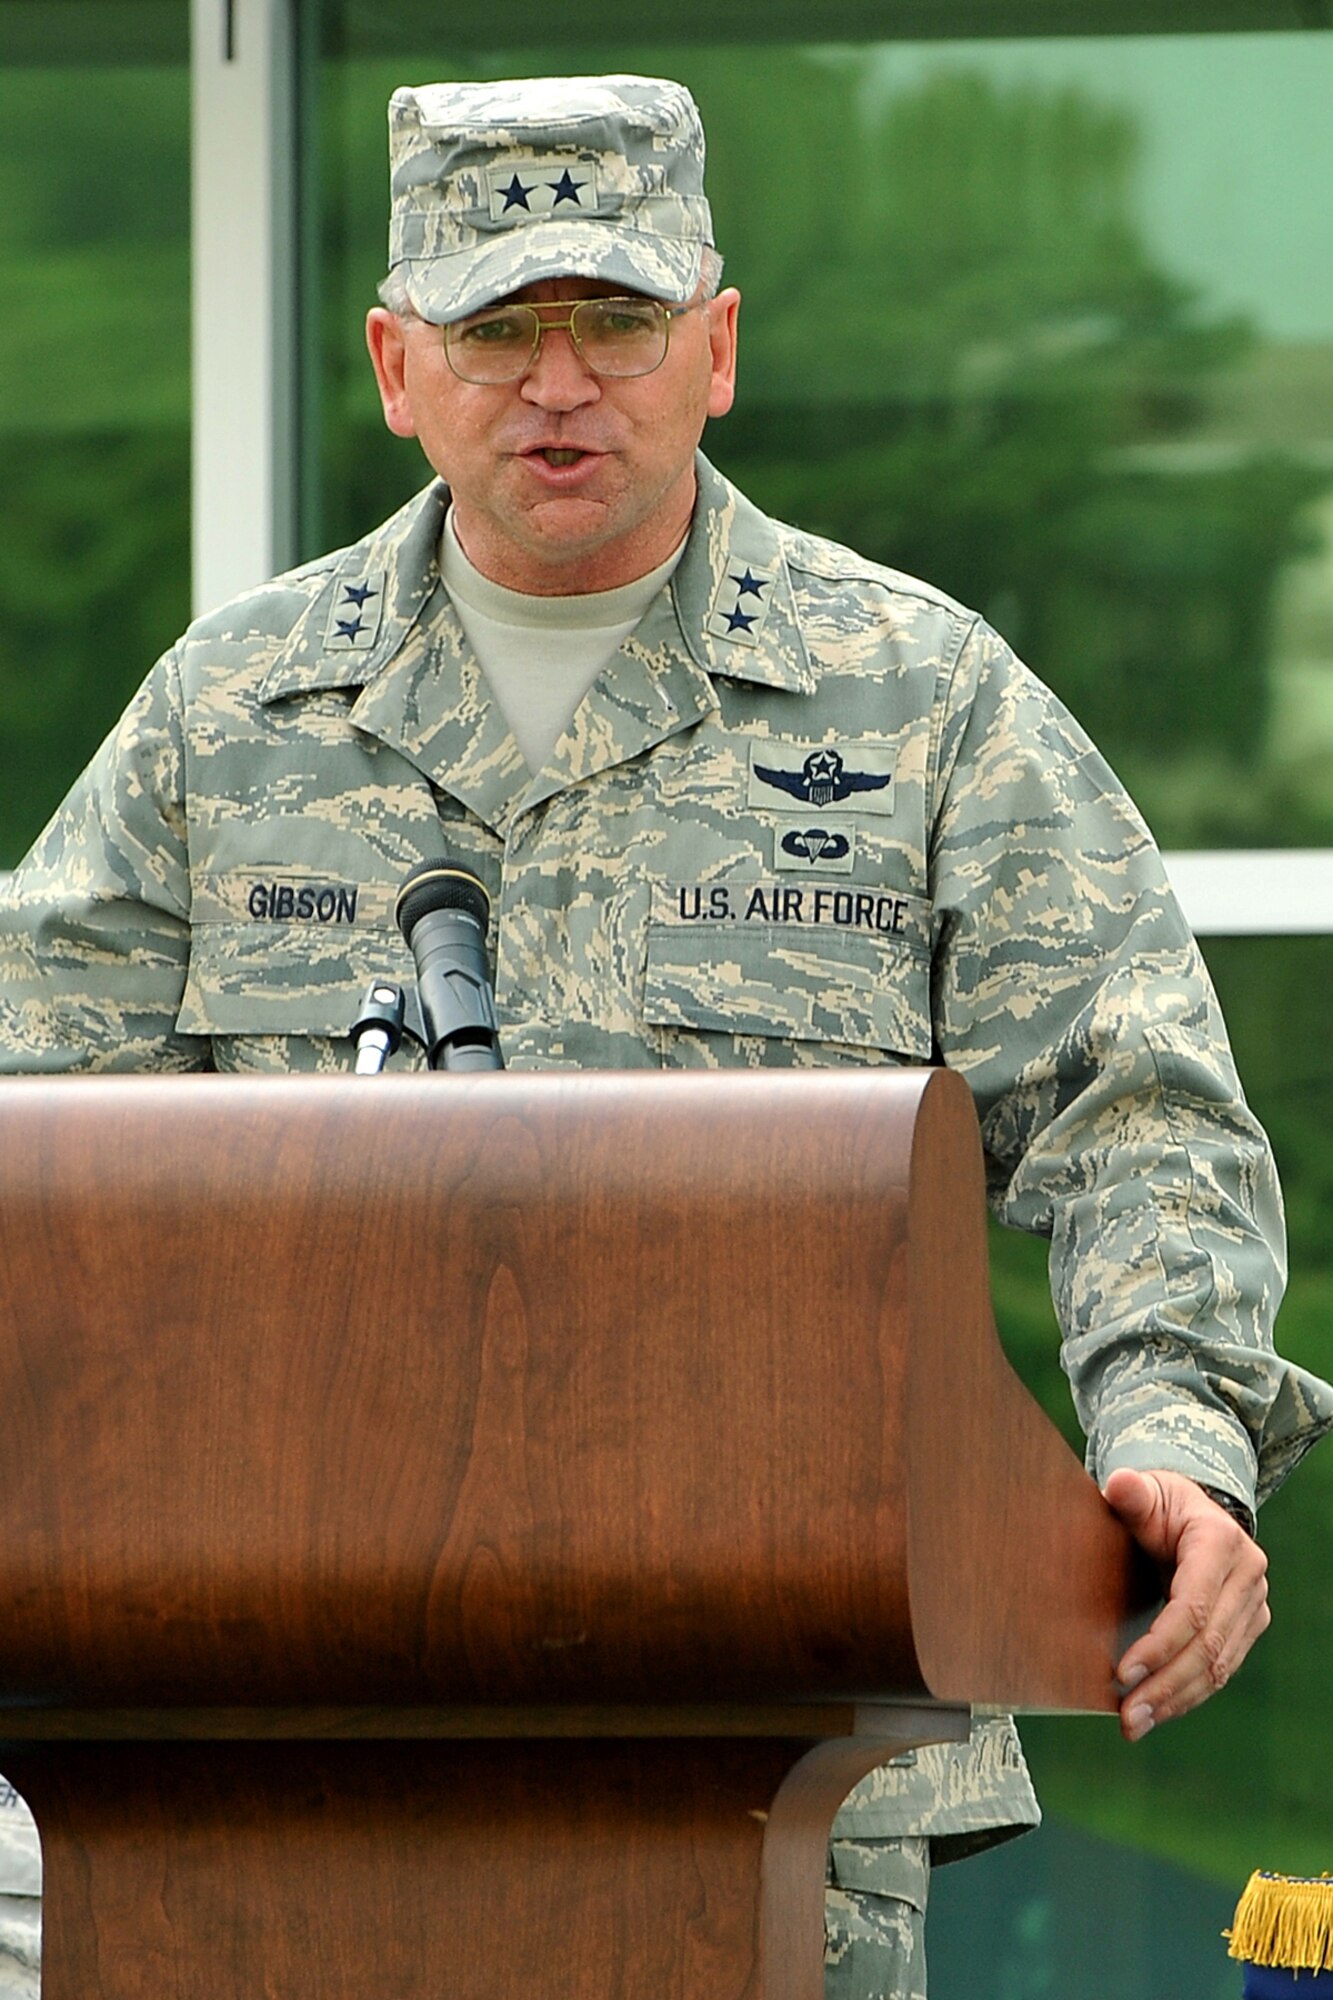 OFFUTT AIR FORCE BASE, Neb. -- Maj. Gen. Marke Gibson, Air Force director of operations and deputy chief of staff for operations, plans and requirements, speaks to attendees during the Air Force Weather Agency change of command ceremony in front of the Lt. Gen. Thomas S. Moorman building here April 20. The agency is comprised of more than 1,400 active-duty members, civil service employees and contractors at 14 operating locations around the world, which provide centralized weather products and services, including climatological and space weather support to all branches of the armed forces. U.S. Air Force photo by Charles Haymond